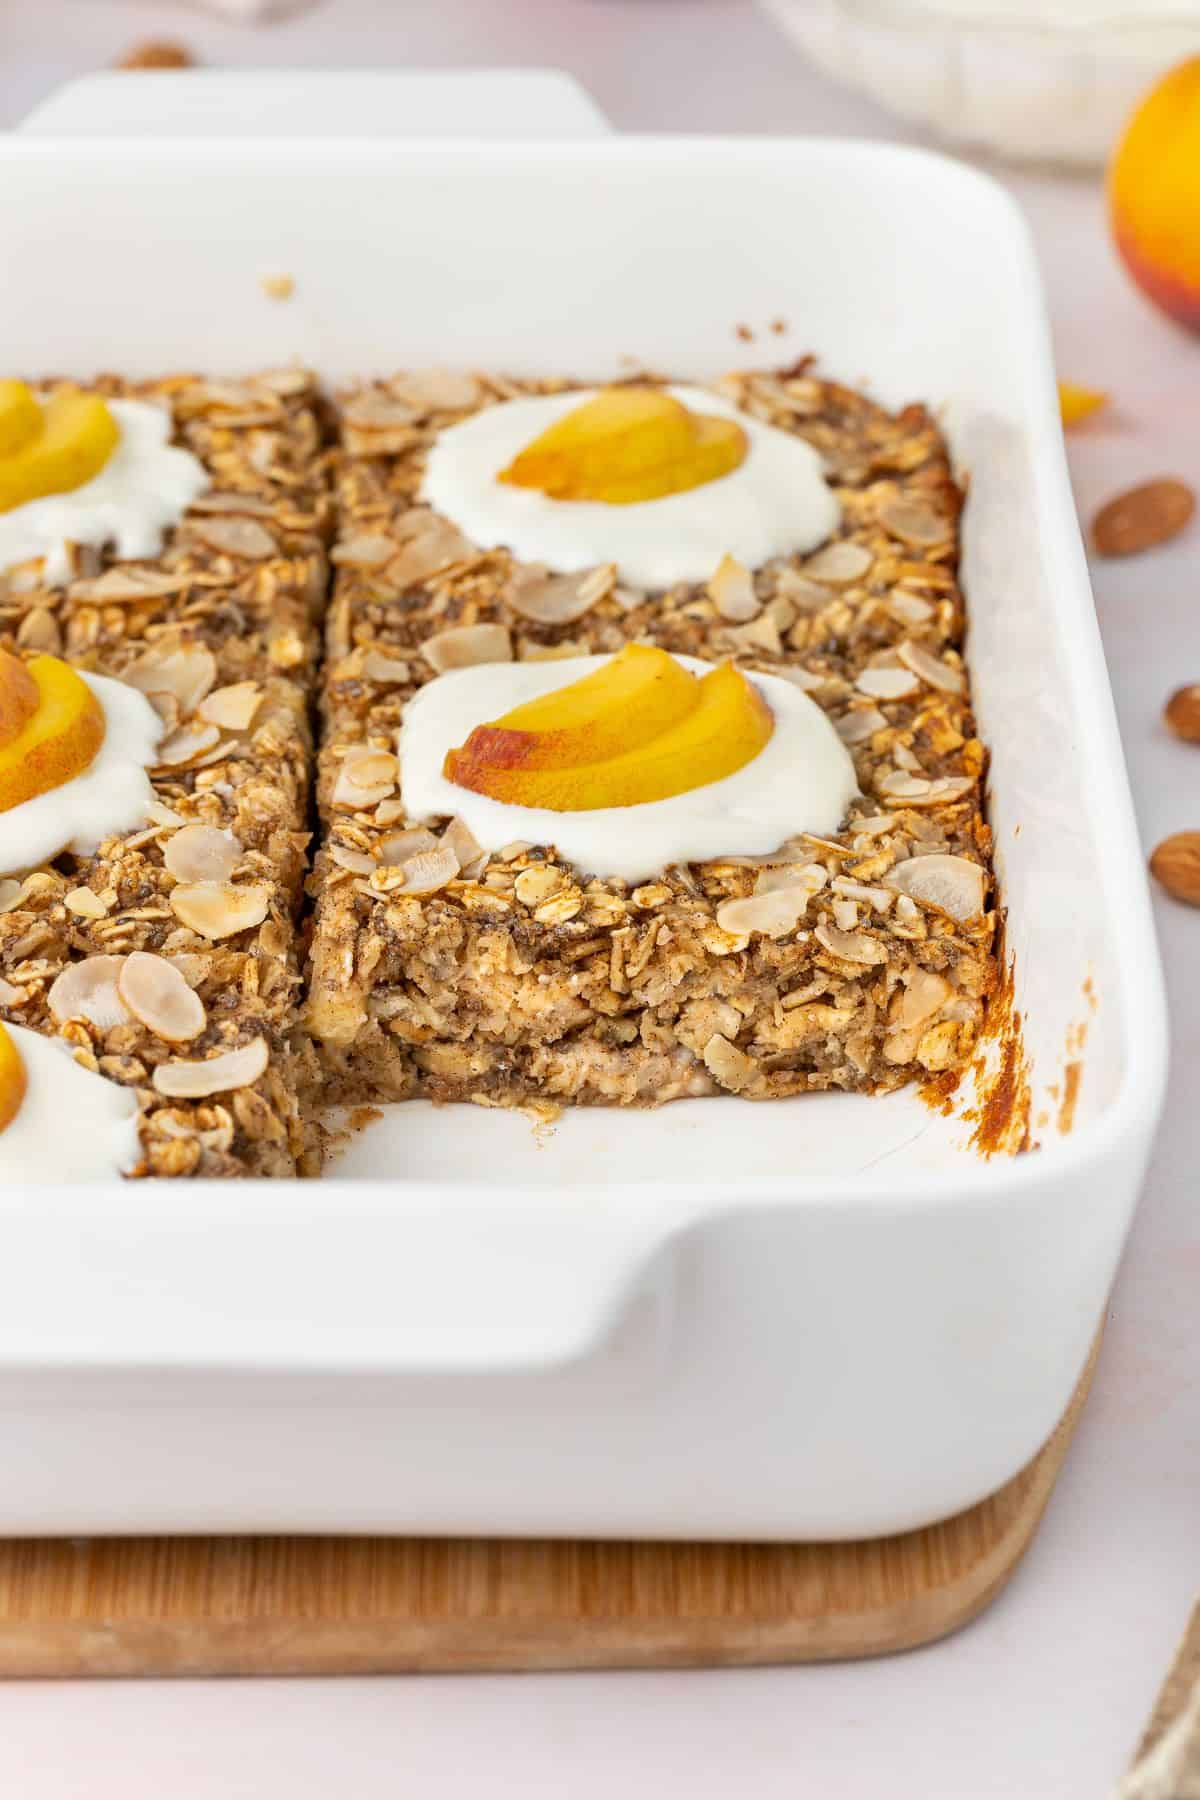 White rectangular dish with baked peach oatmeal, with one piece missing.